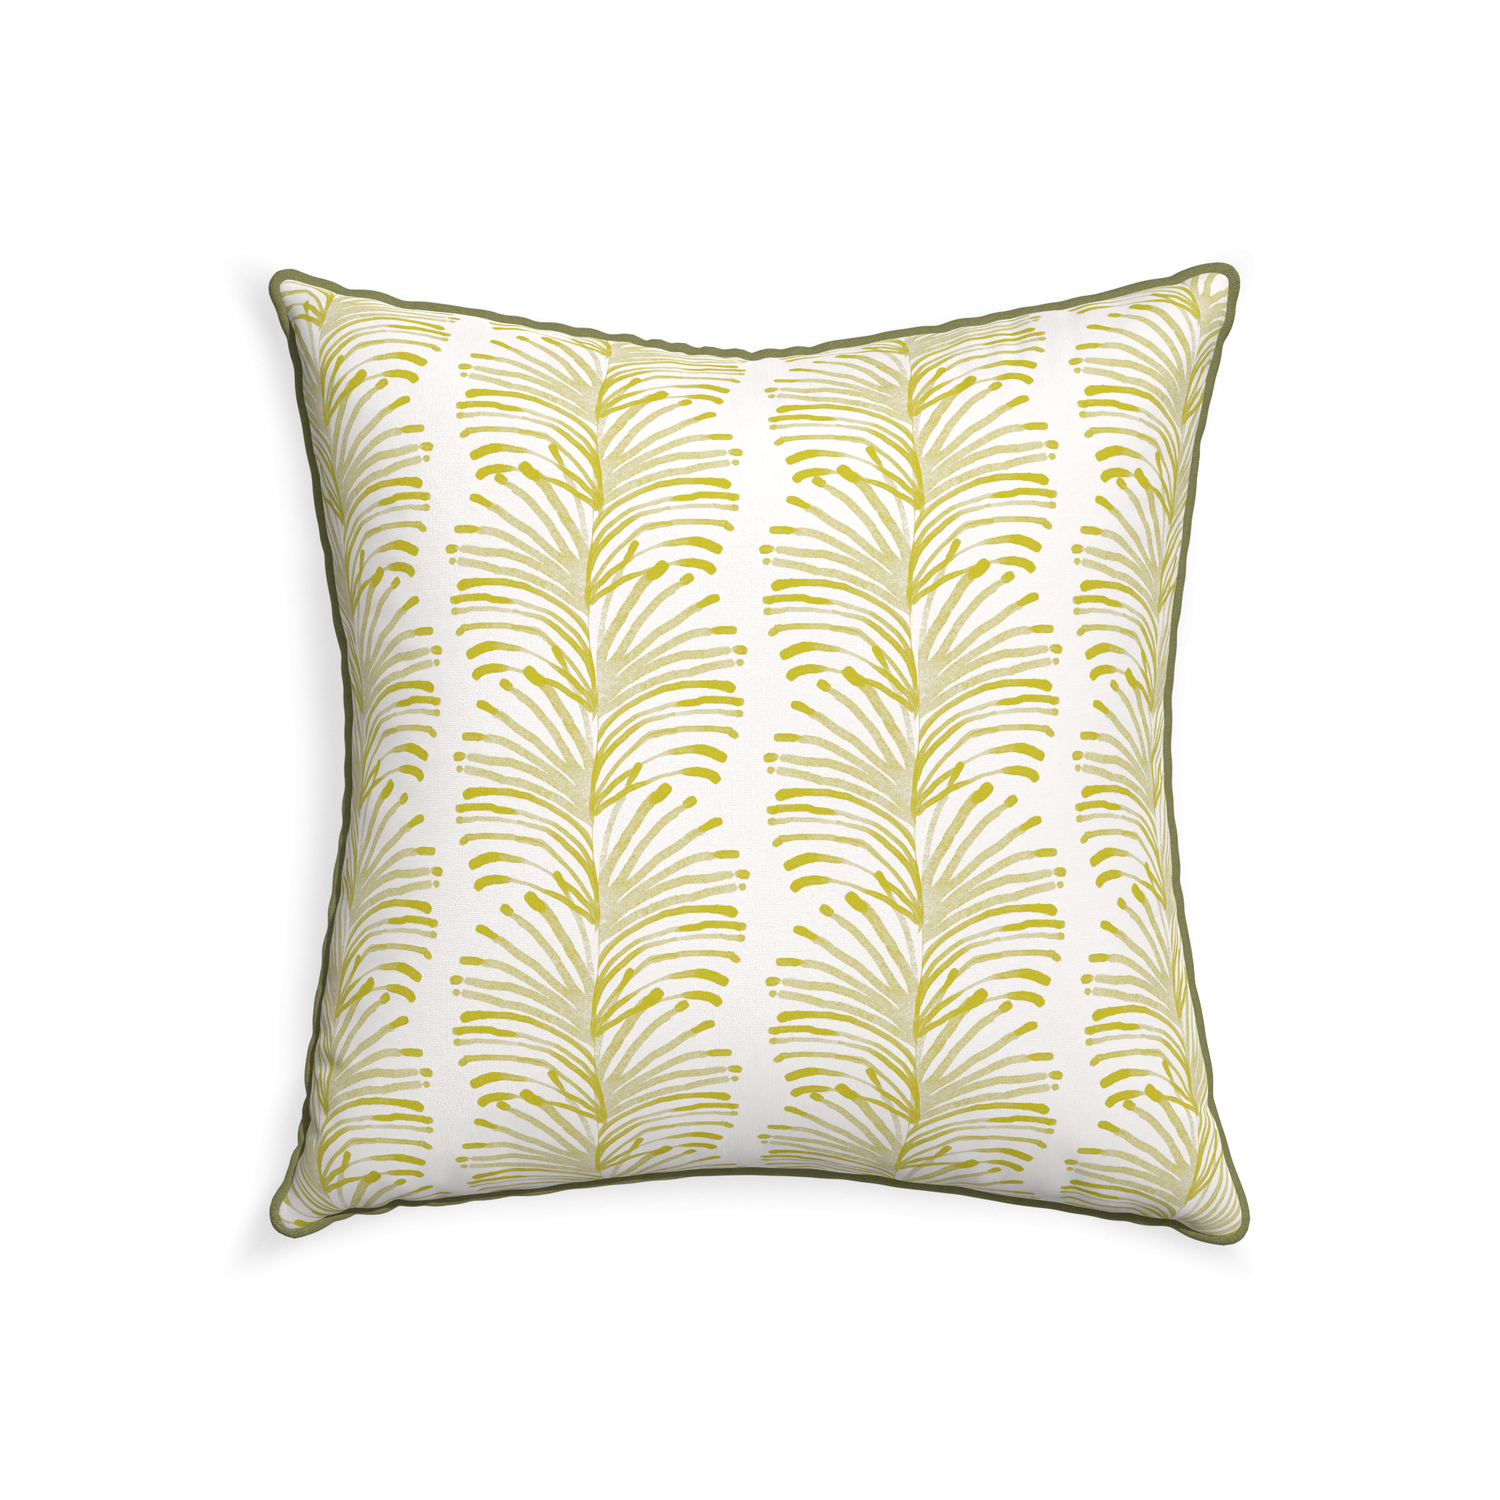 22-square emma chartreuse custom pillow with moss piping on white background